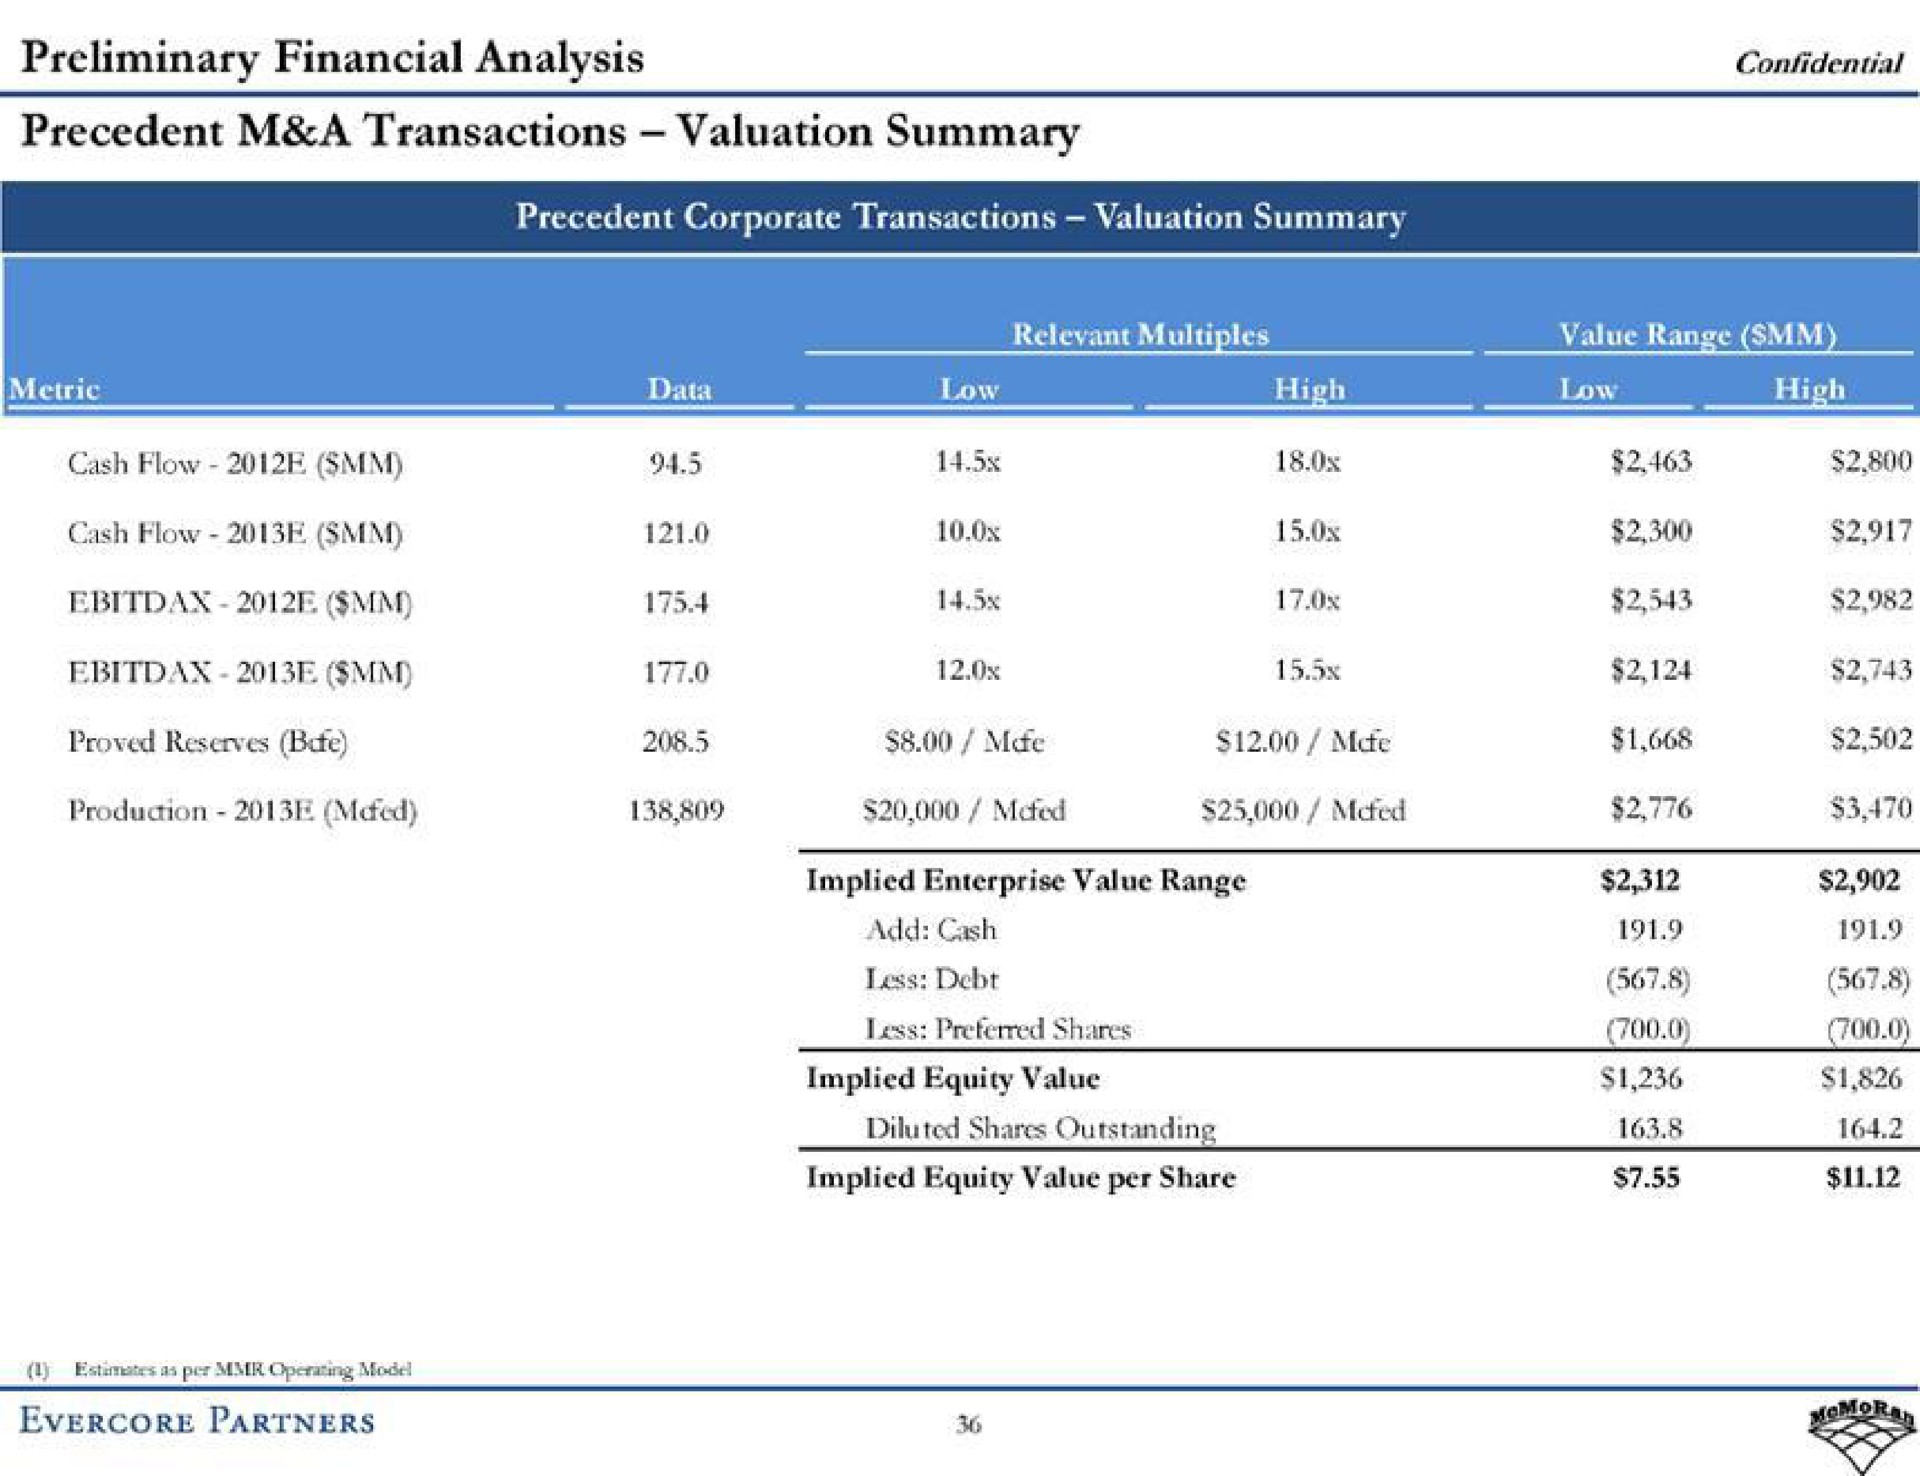 preliminary financial analysis confidential precedent a transactions valuation summary production meed implied enterprise less debt implied equity value ods partners | Evercore